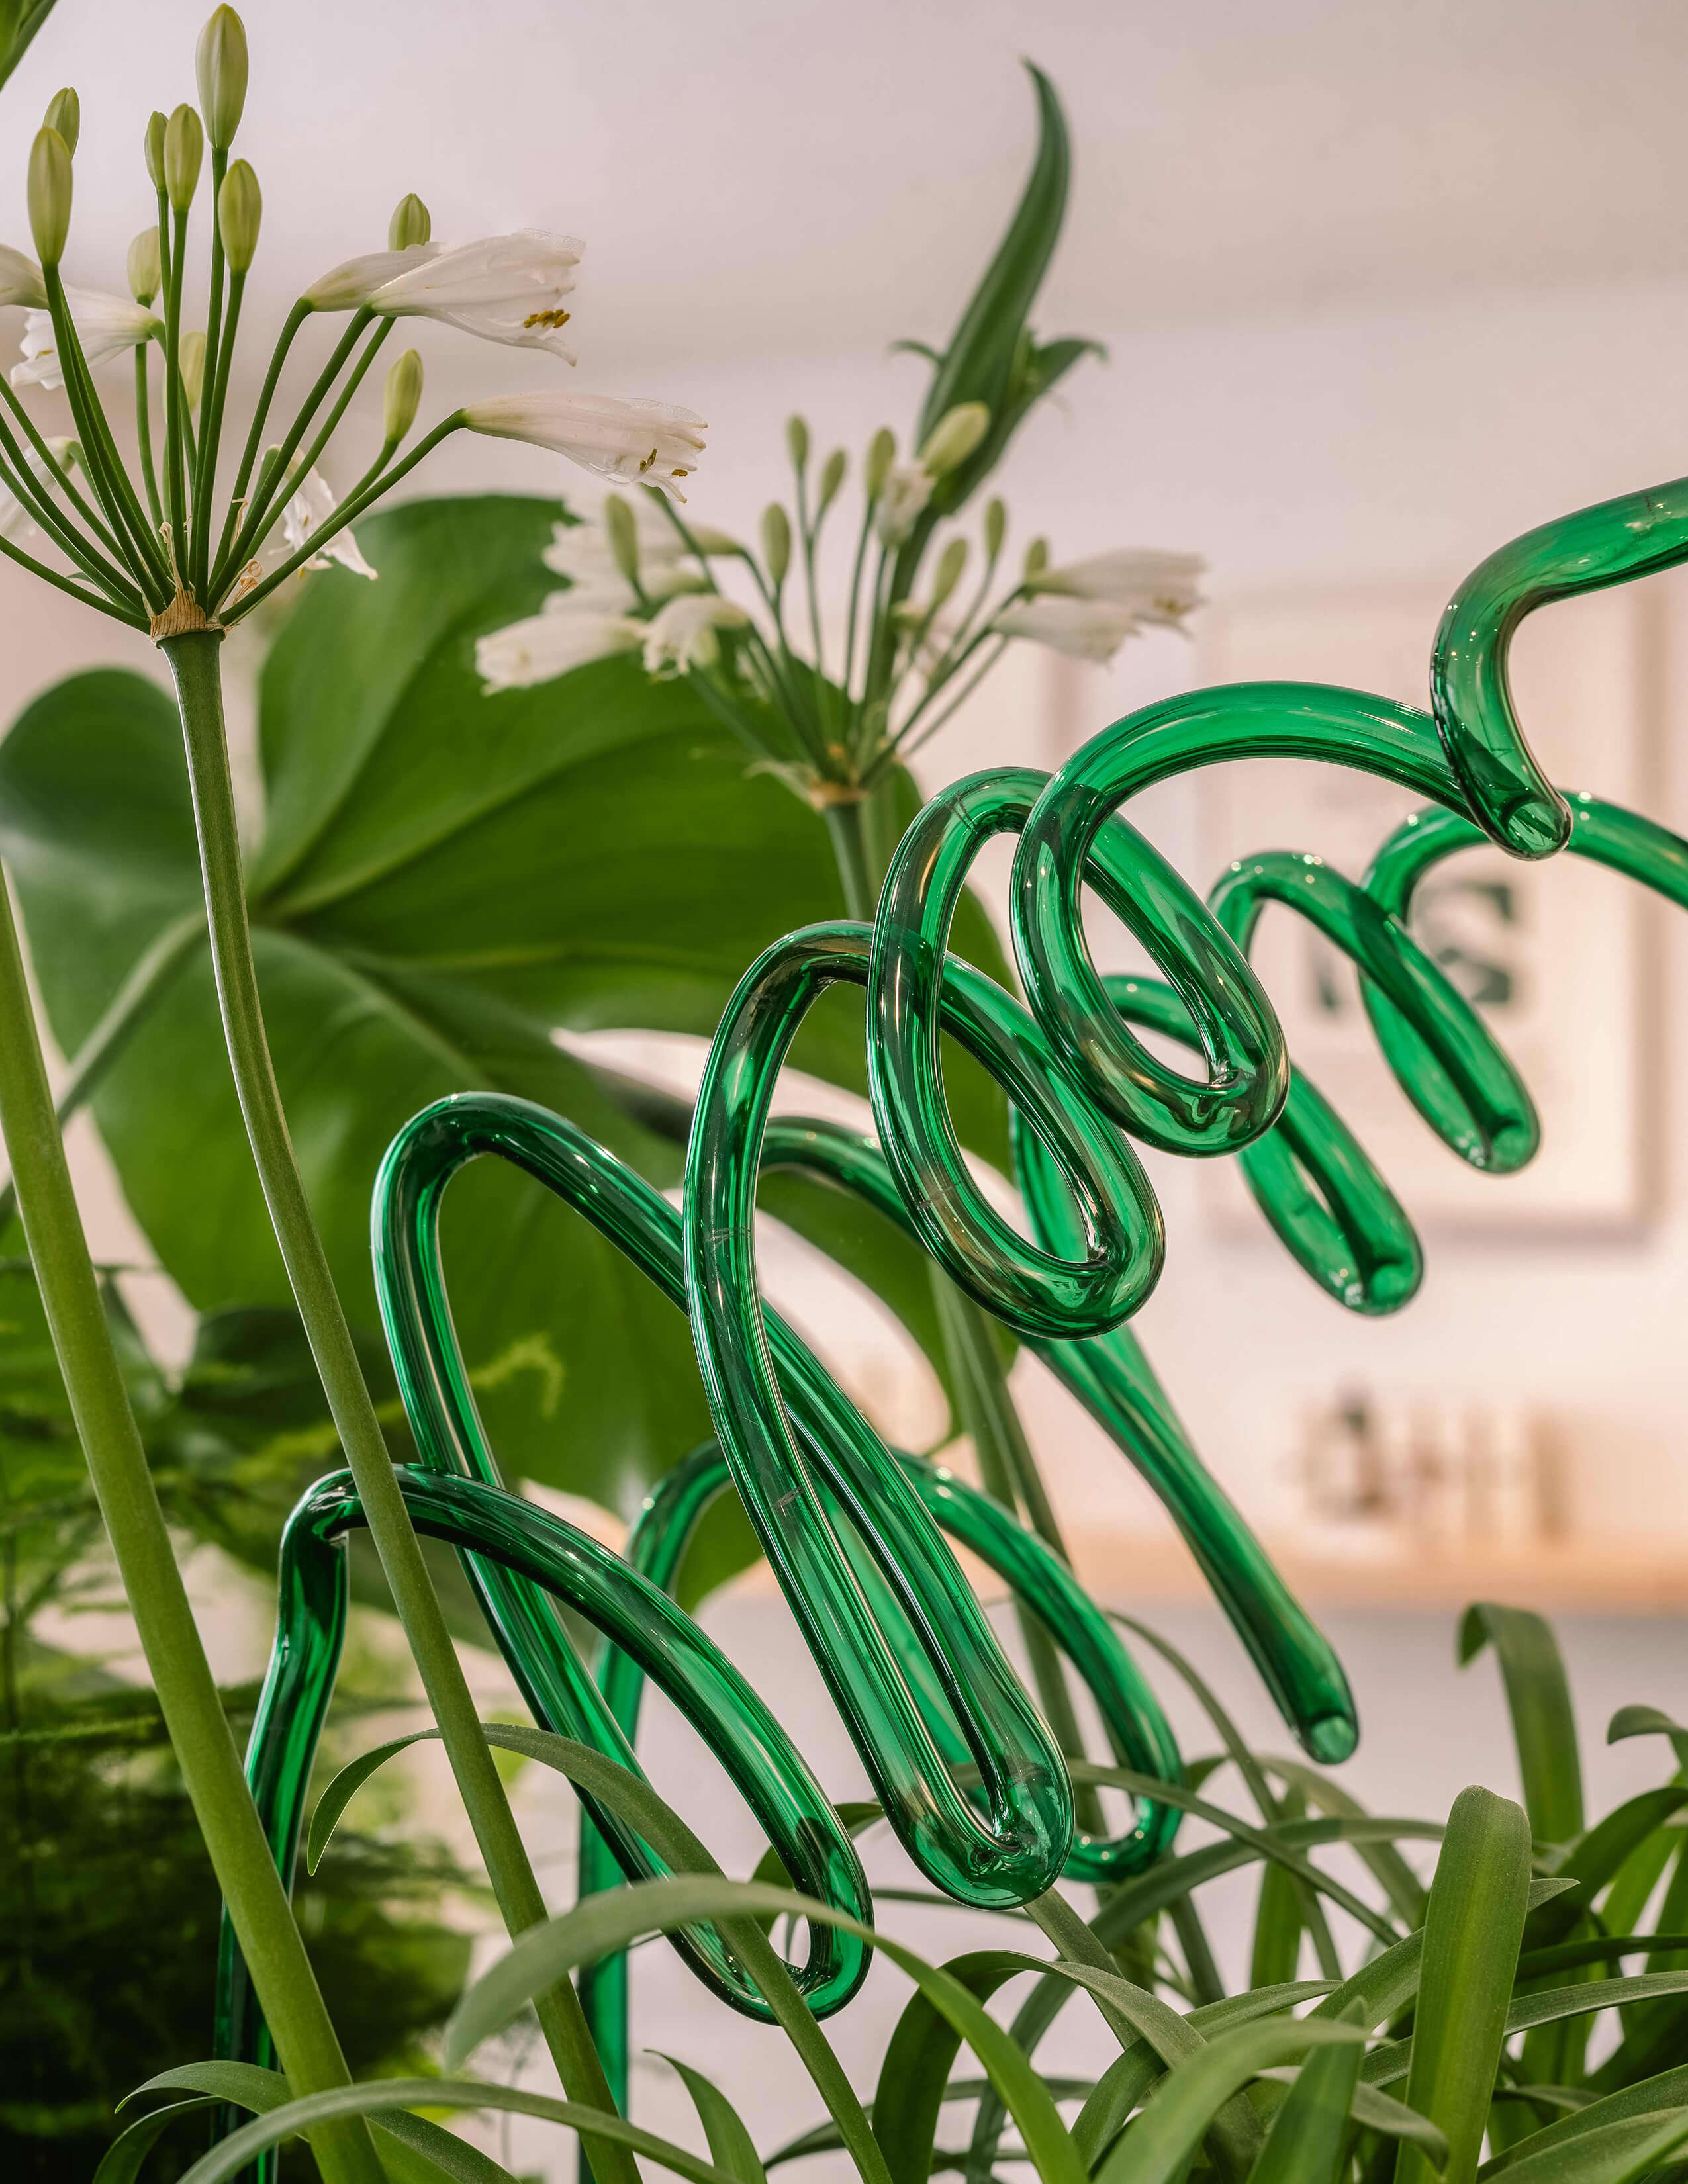 A green curly glass pipe among different kinds of plants and flowers.